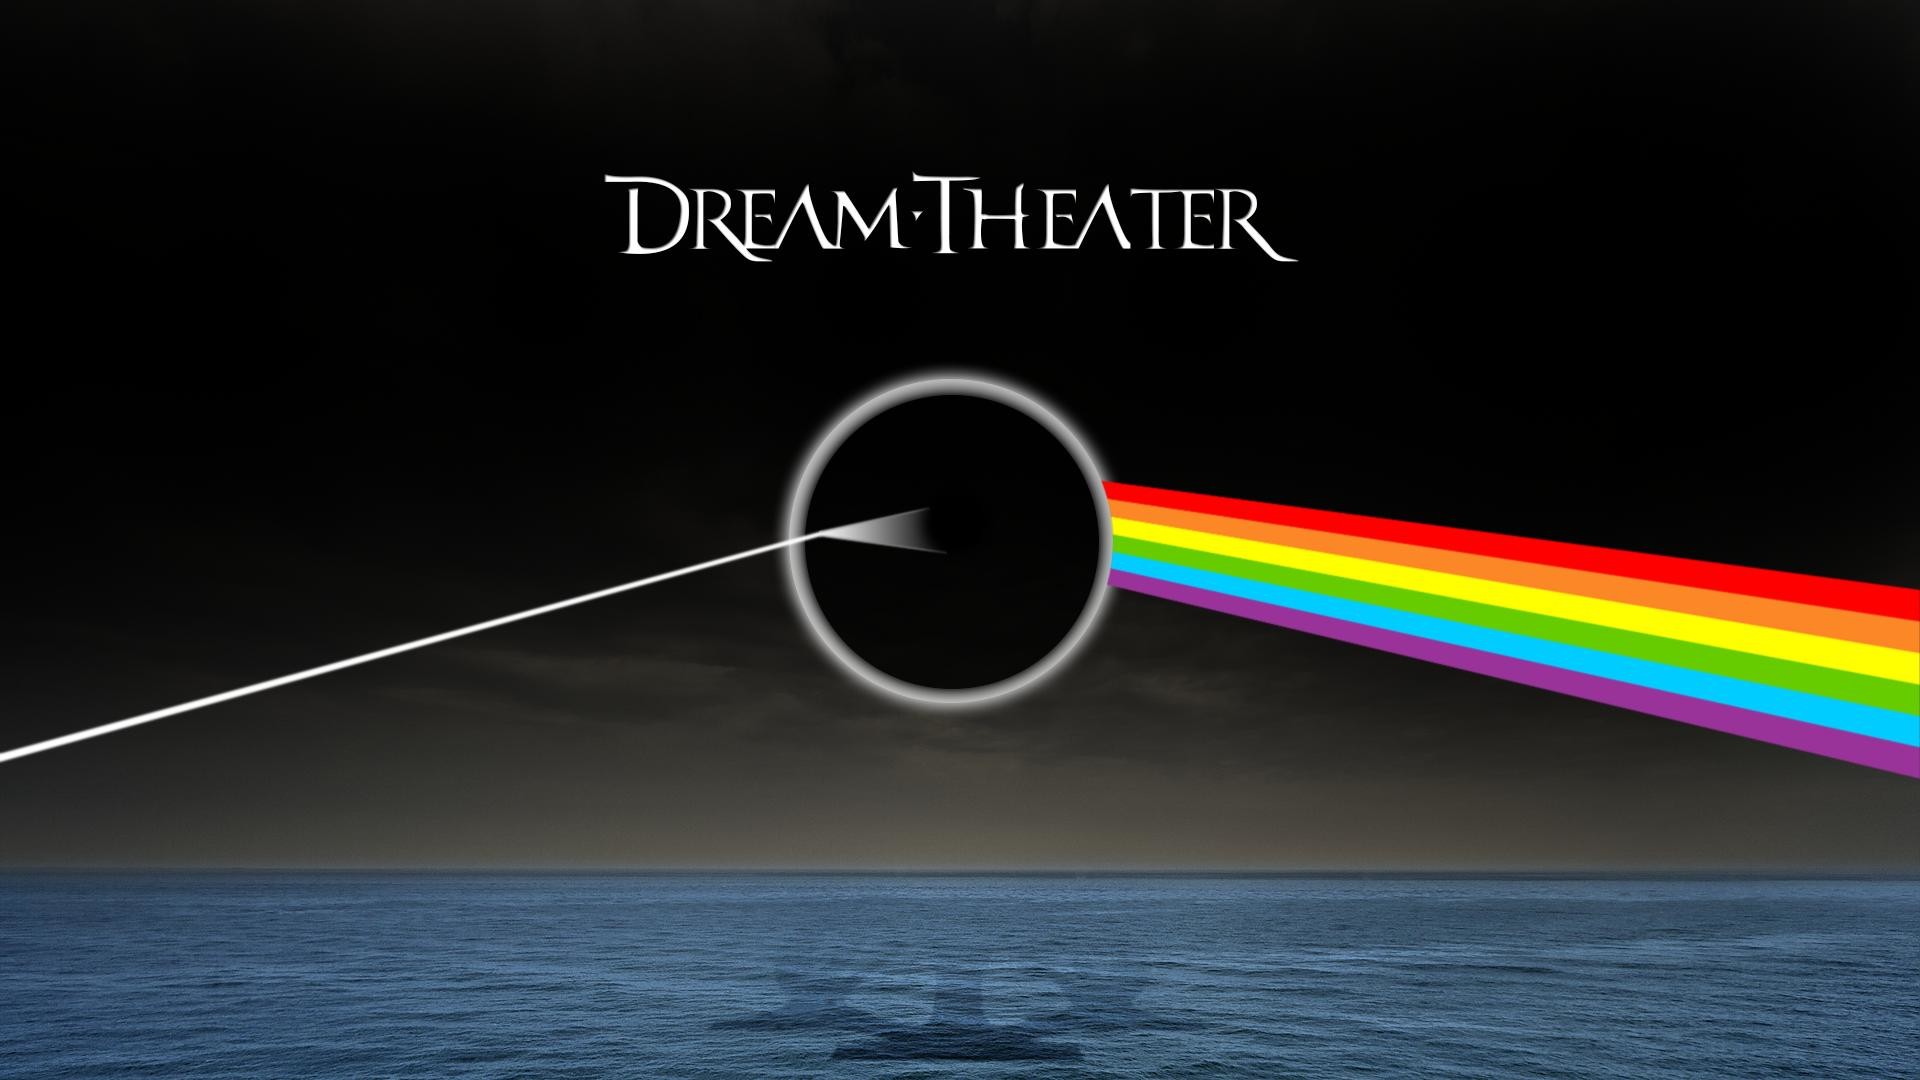 1920x1080 I have created a wallpaper with a Pink Floyd / Dream Theater crossover.  Tell me what you think.